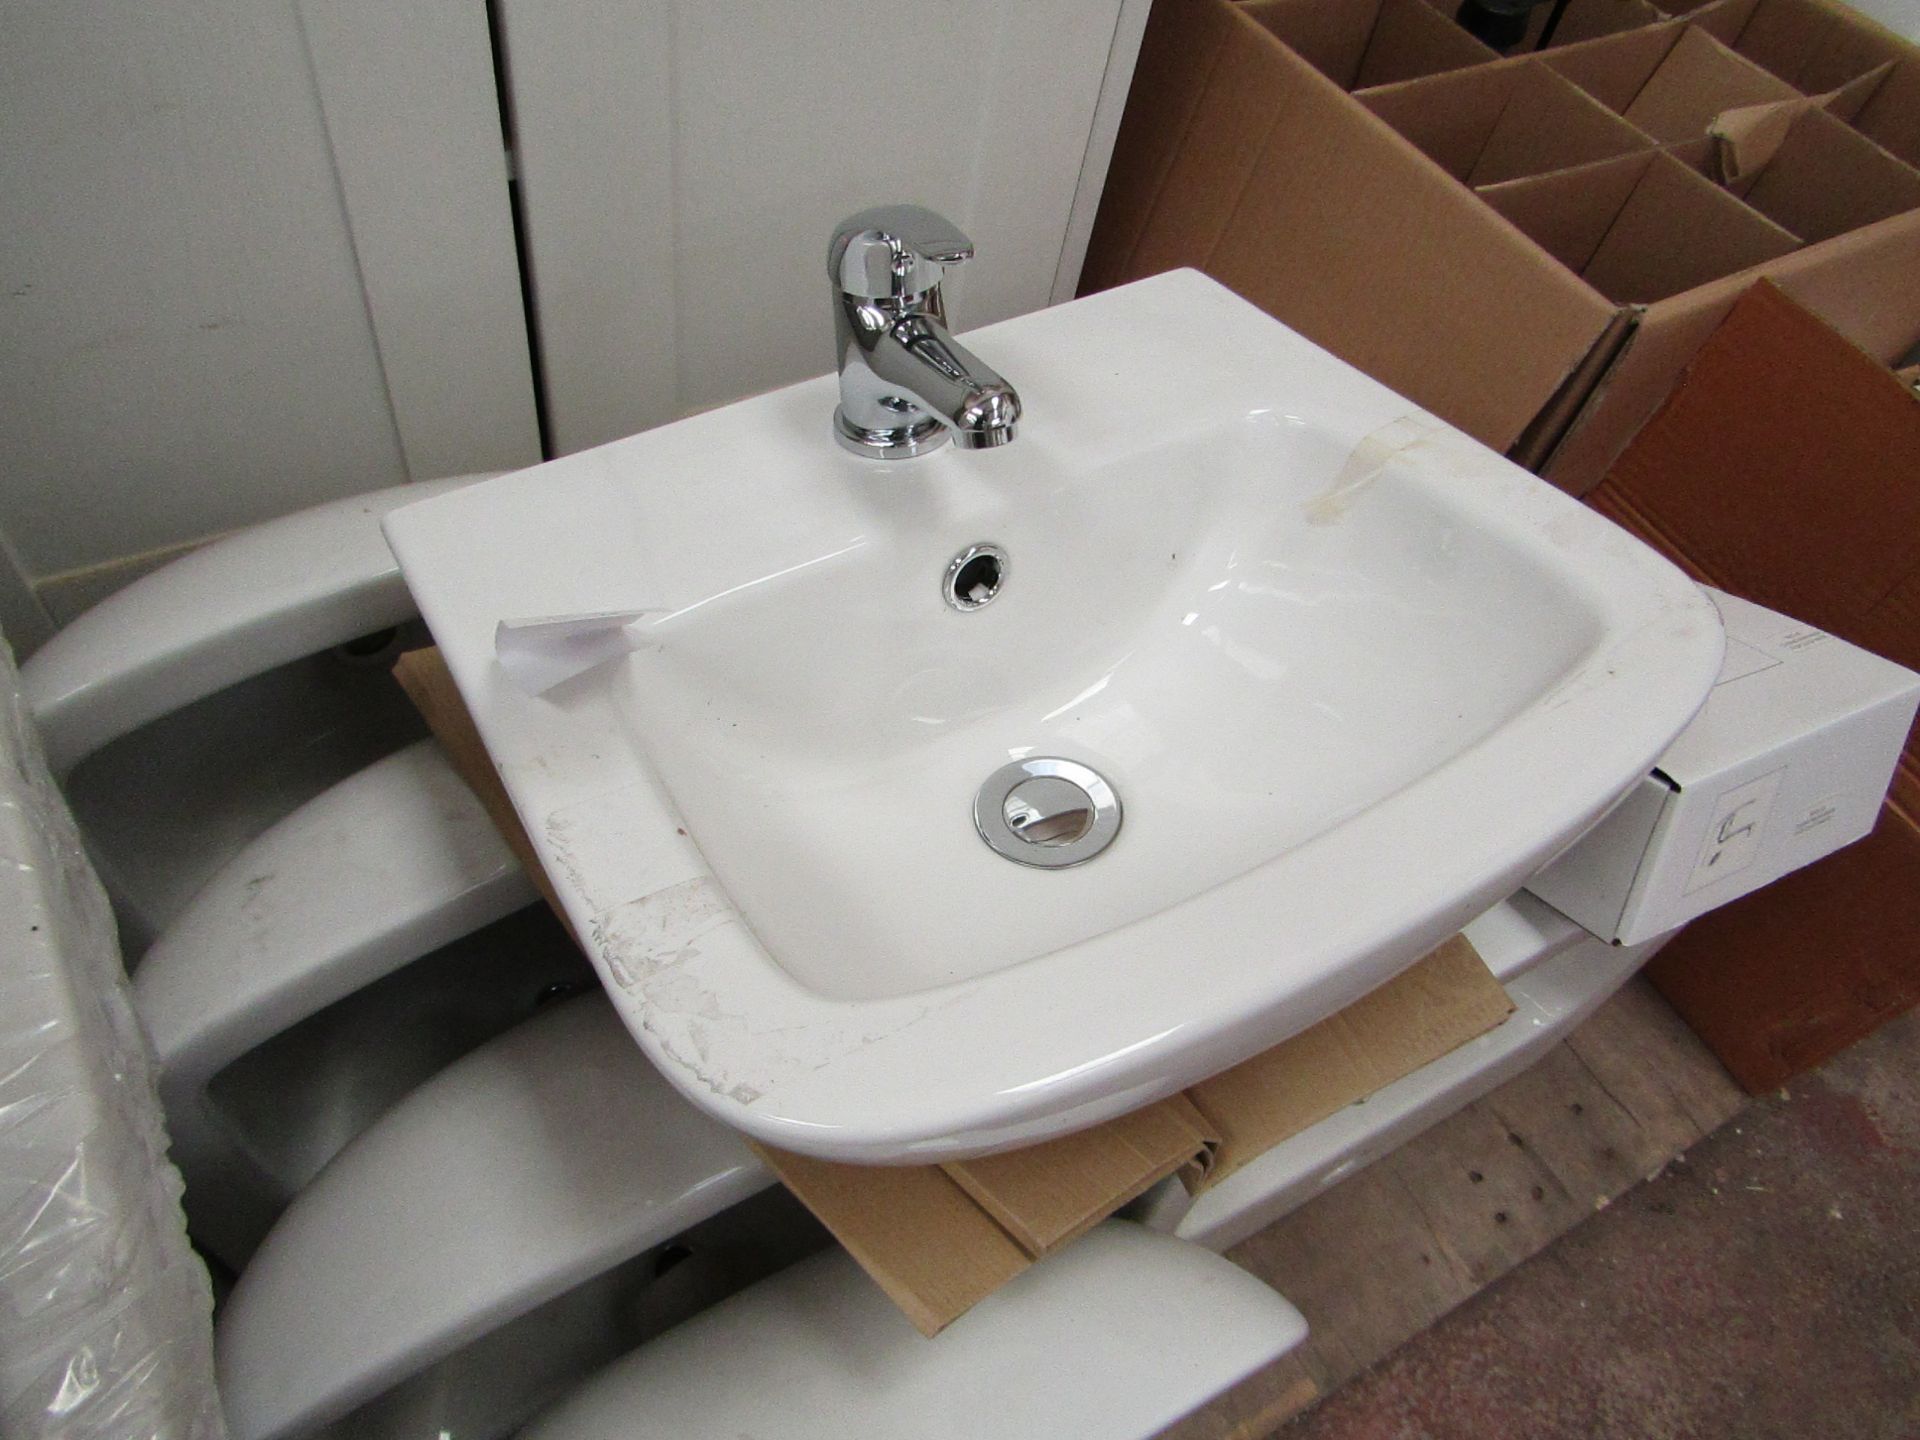 Unbranded Roca cloakroom 1 tap hole basin with overflow and a mono block mixer tap, all new and